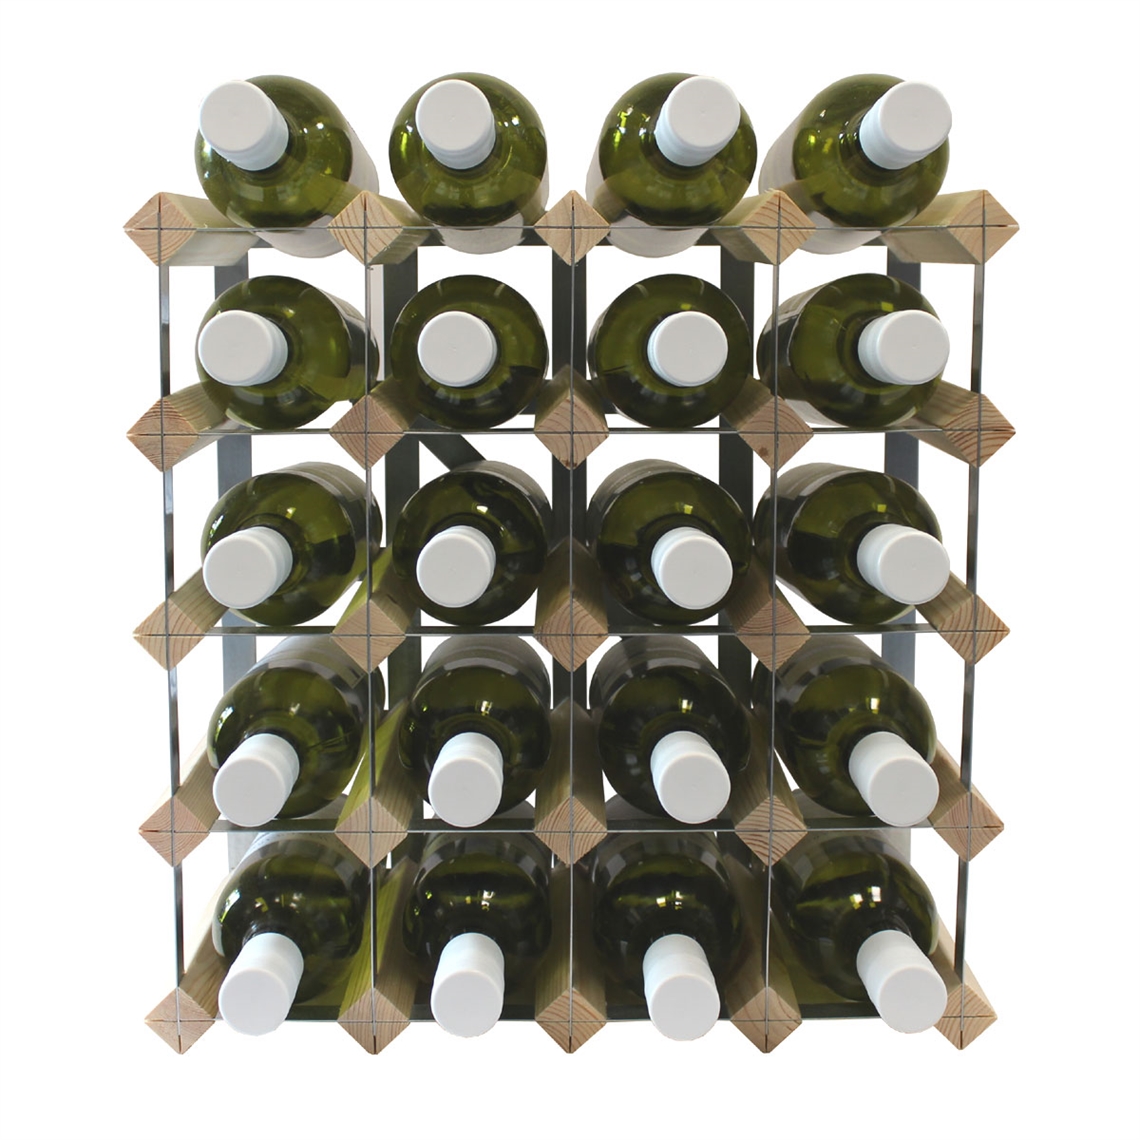 View more cellar cubes from our Assembled Wine Racks range